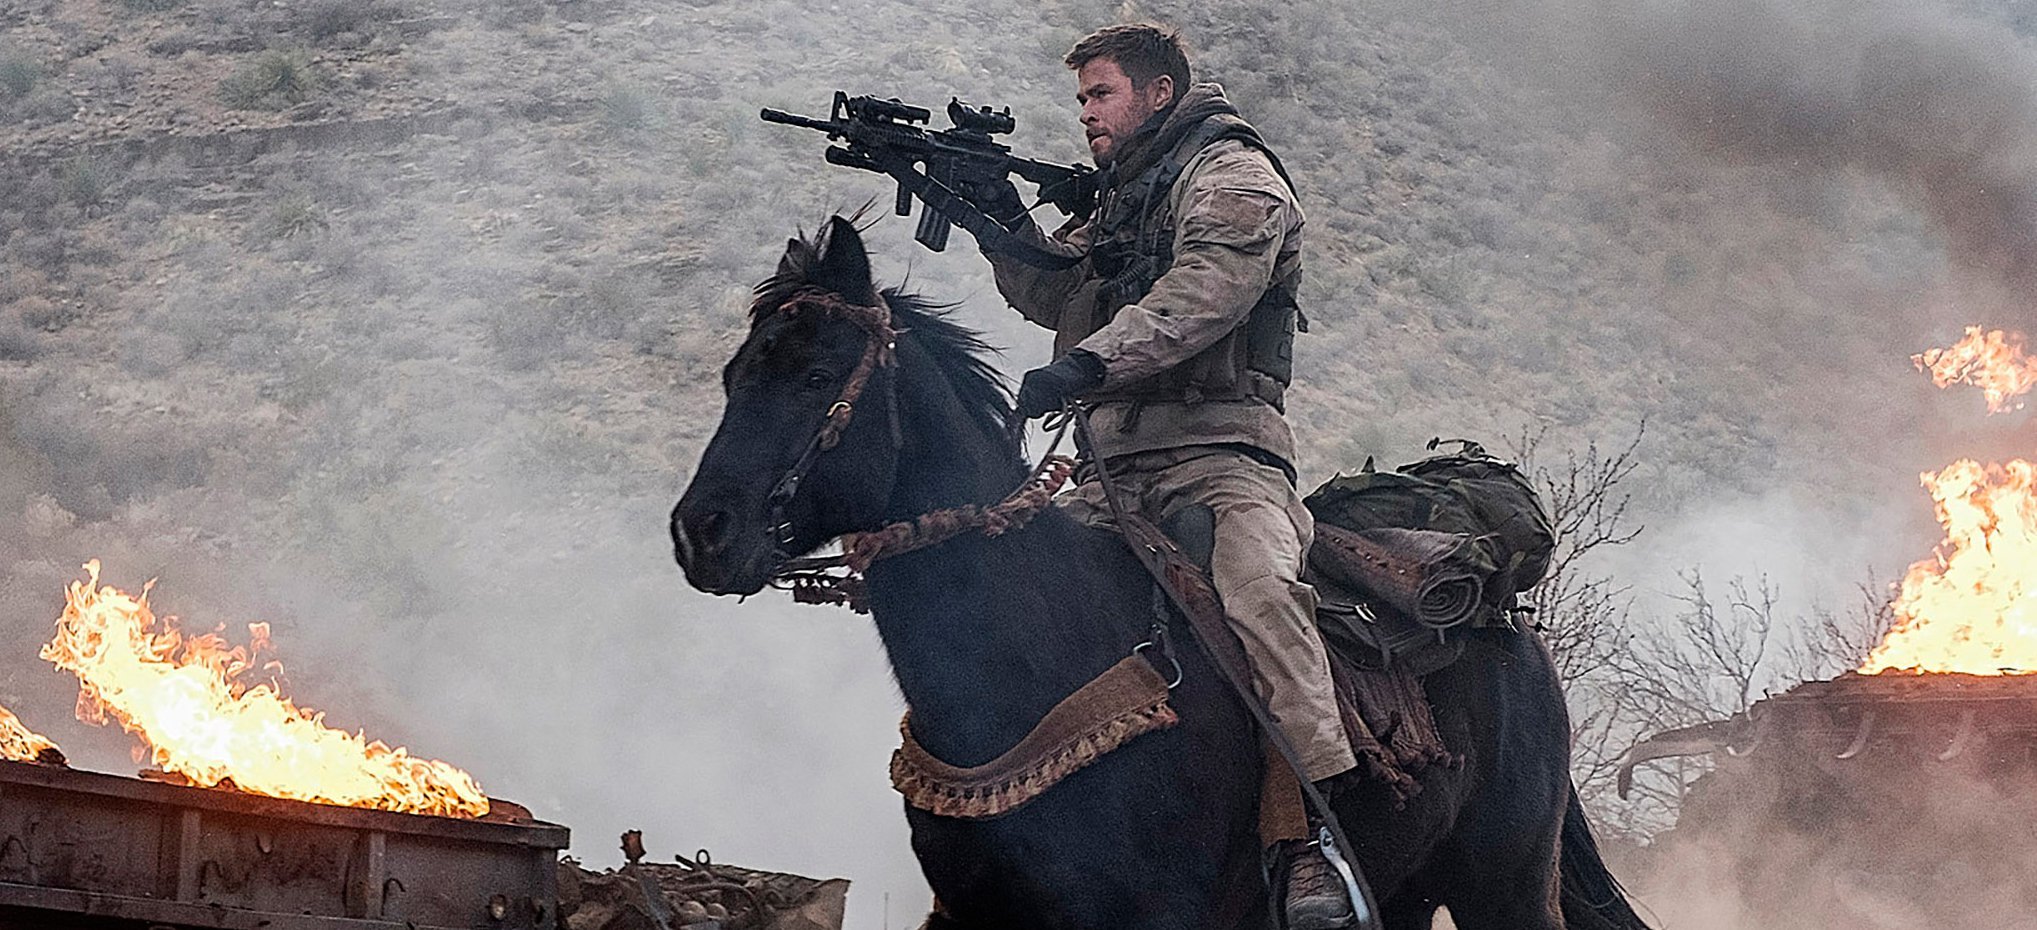 12 strong, movie review, Lucas Mirabella